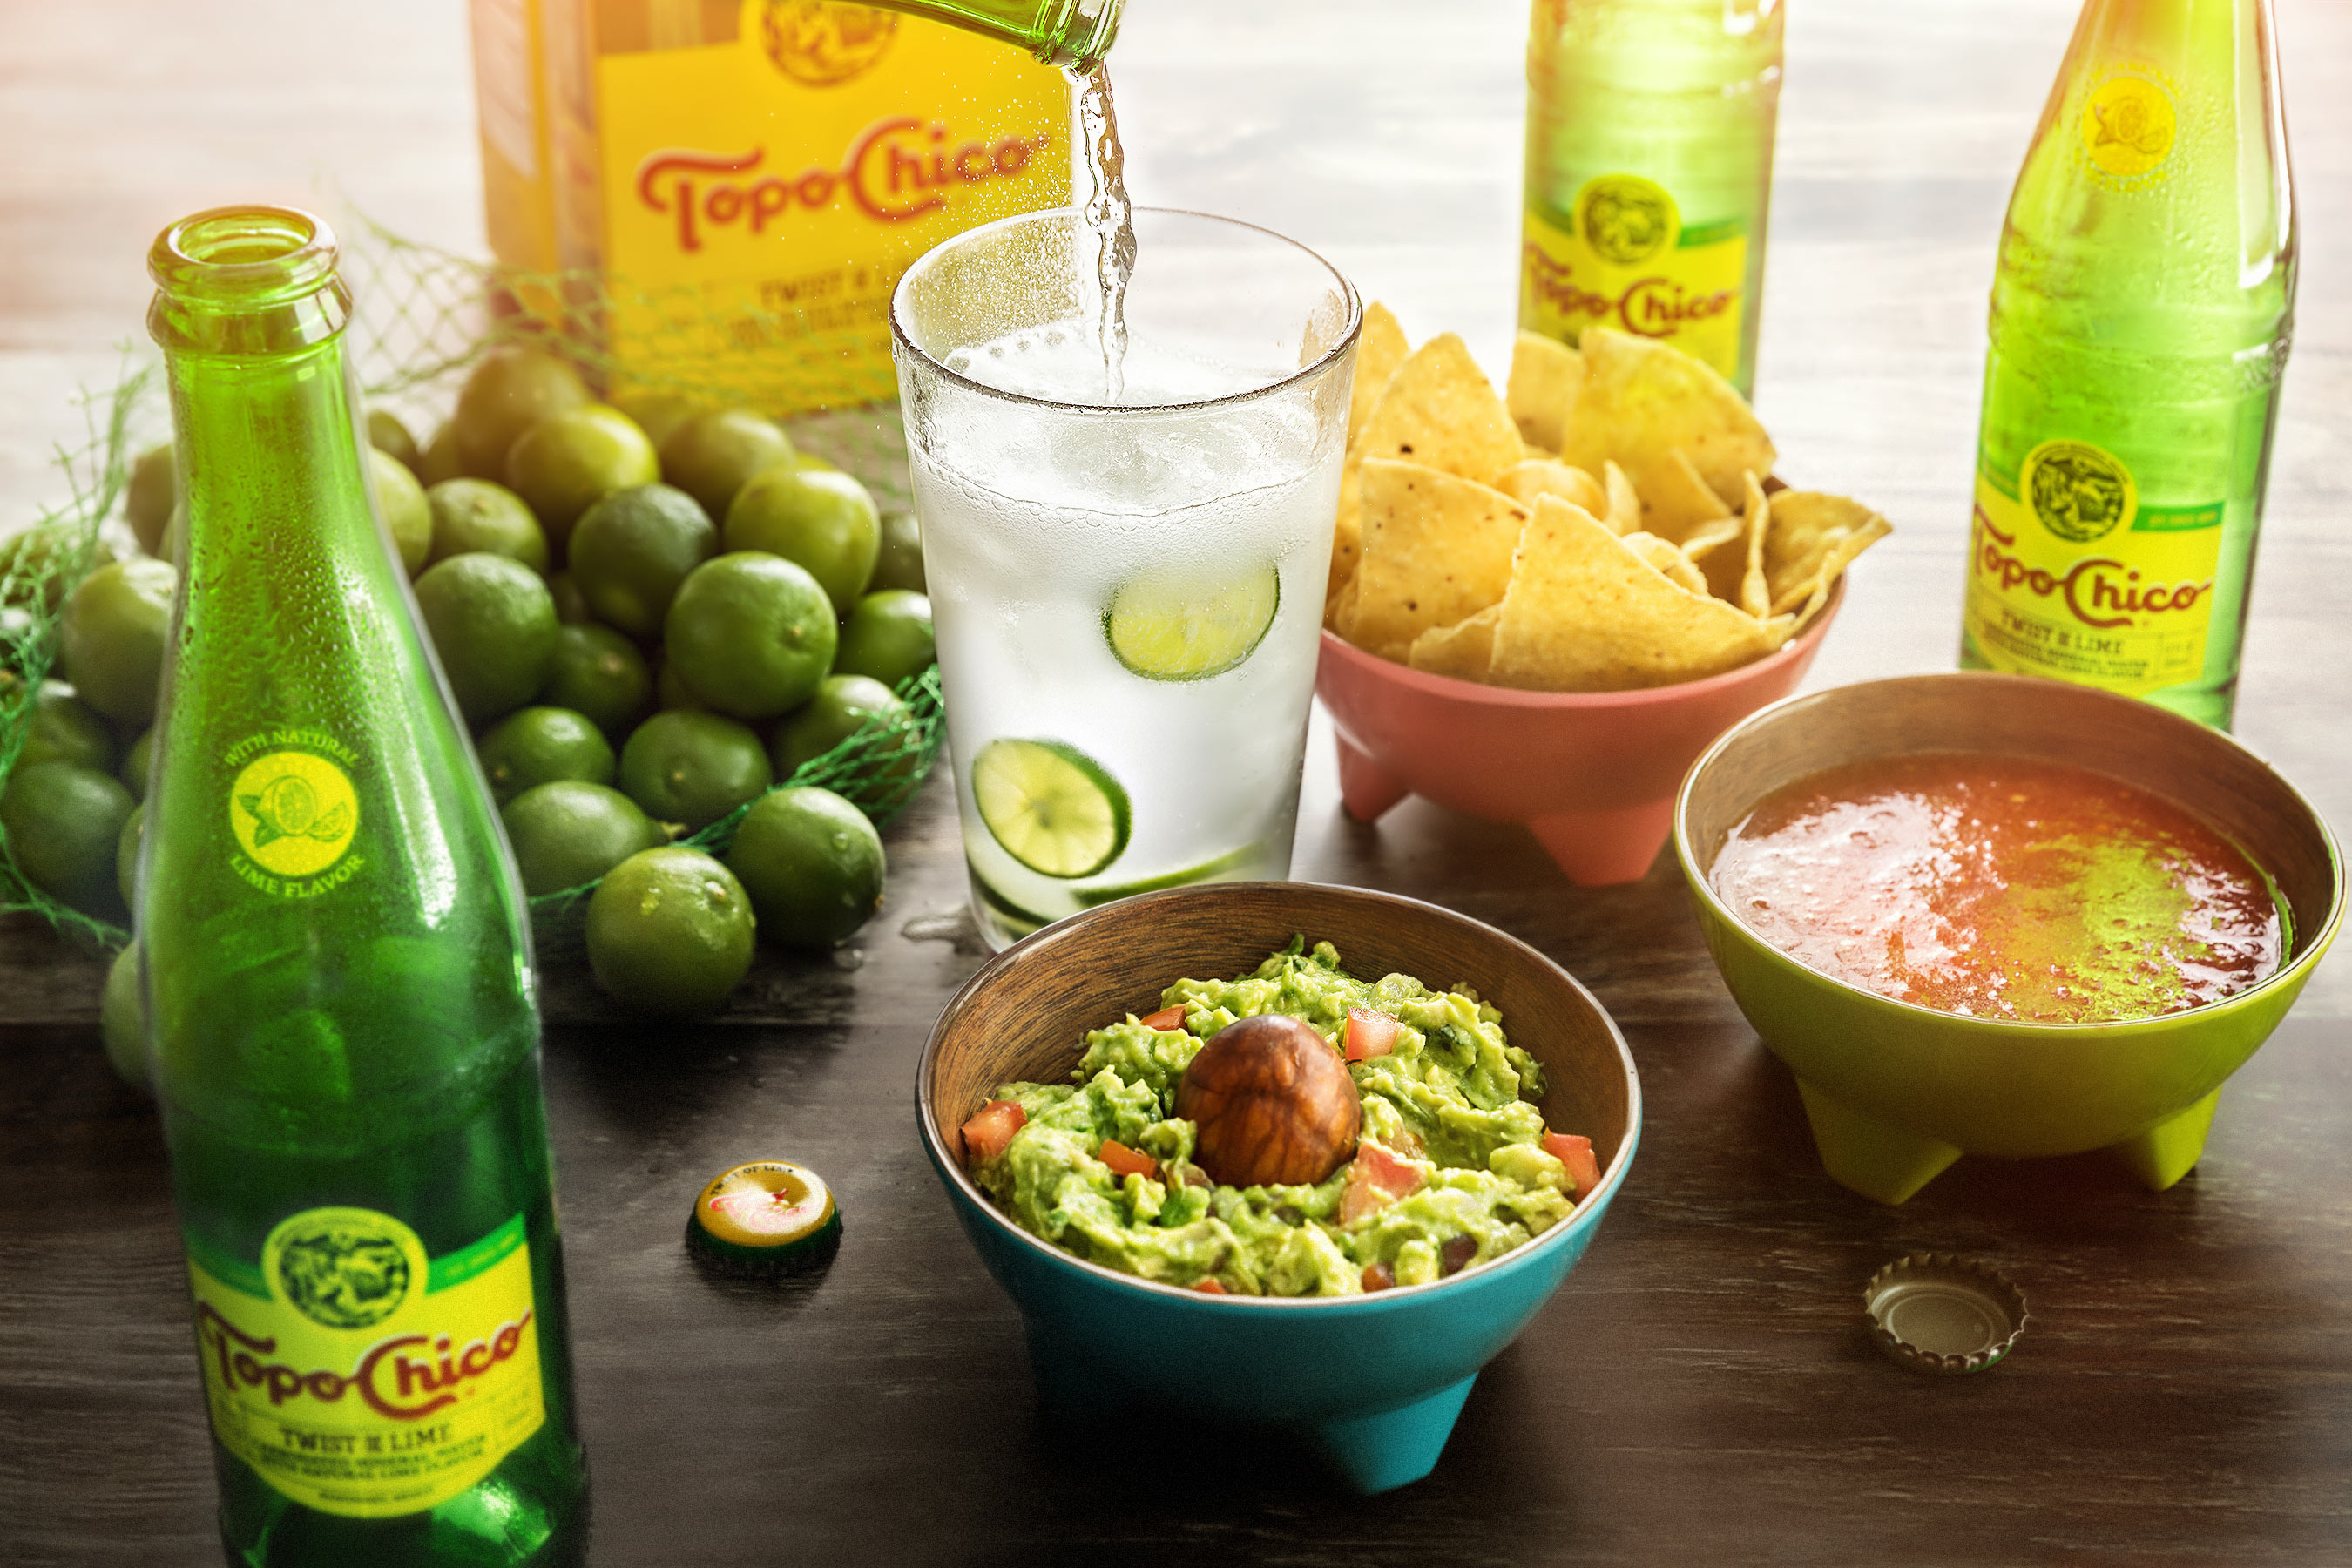 Glanger Photography | Pouring a glass of Topo Chico with bottles, guacamole, limes, chips & salsa